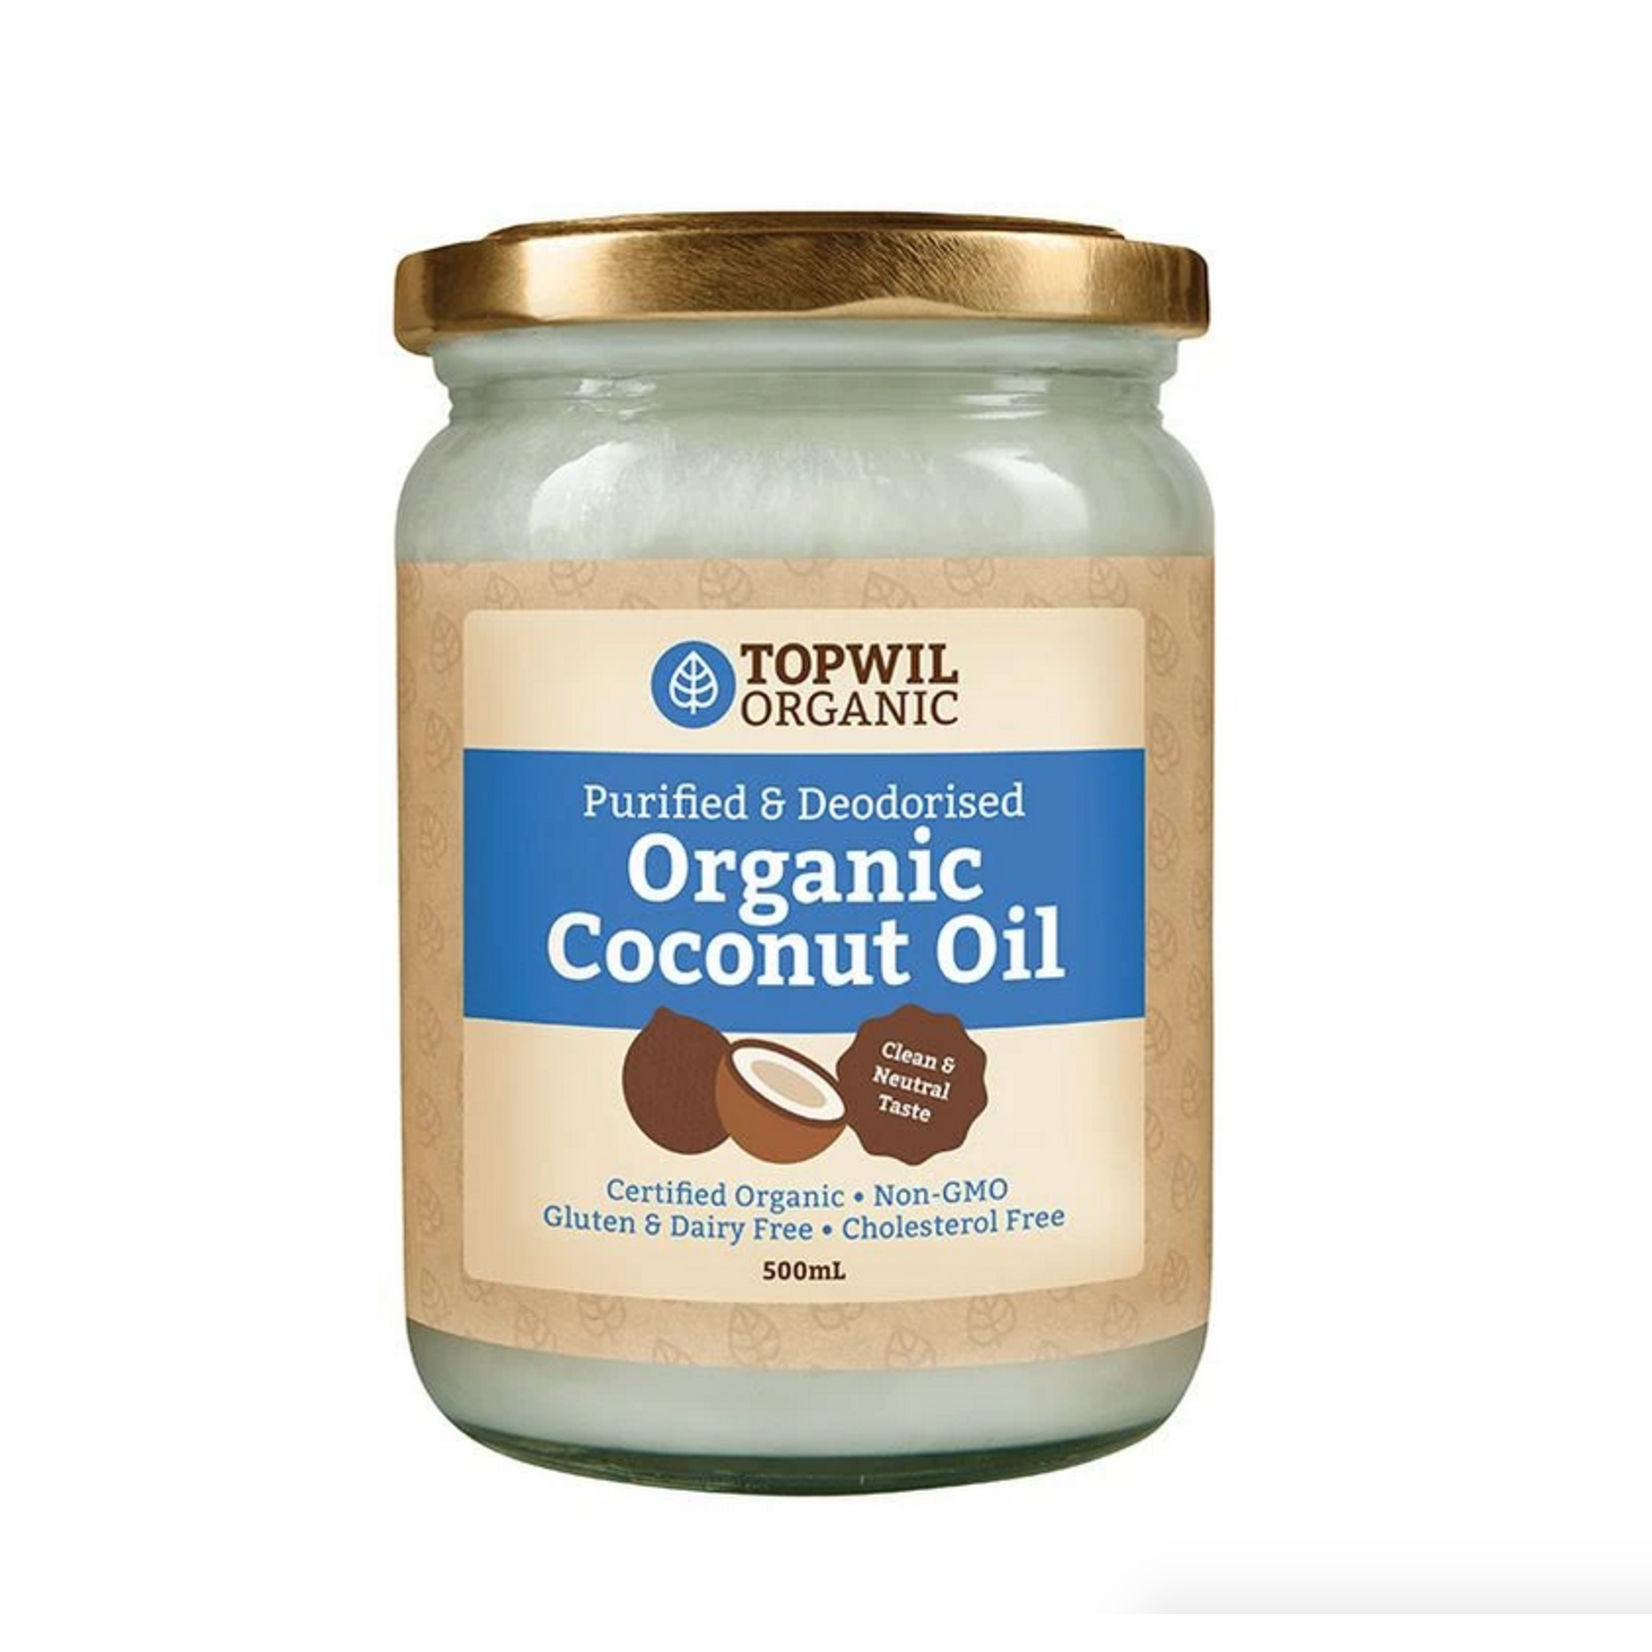 Topwil Topwil Organic Coconut Oil Purified and Deodorised 300g